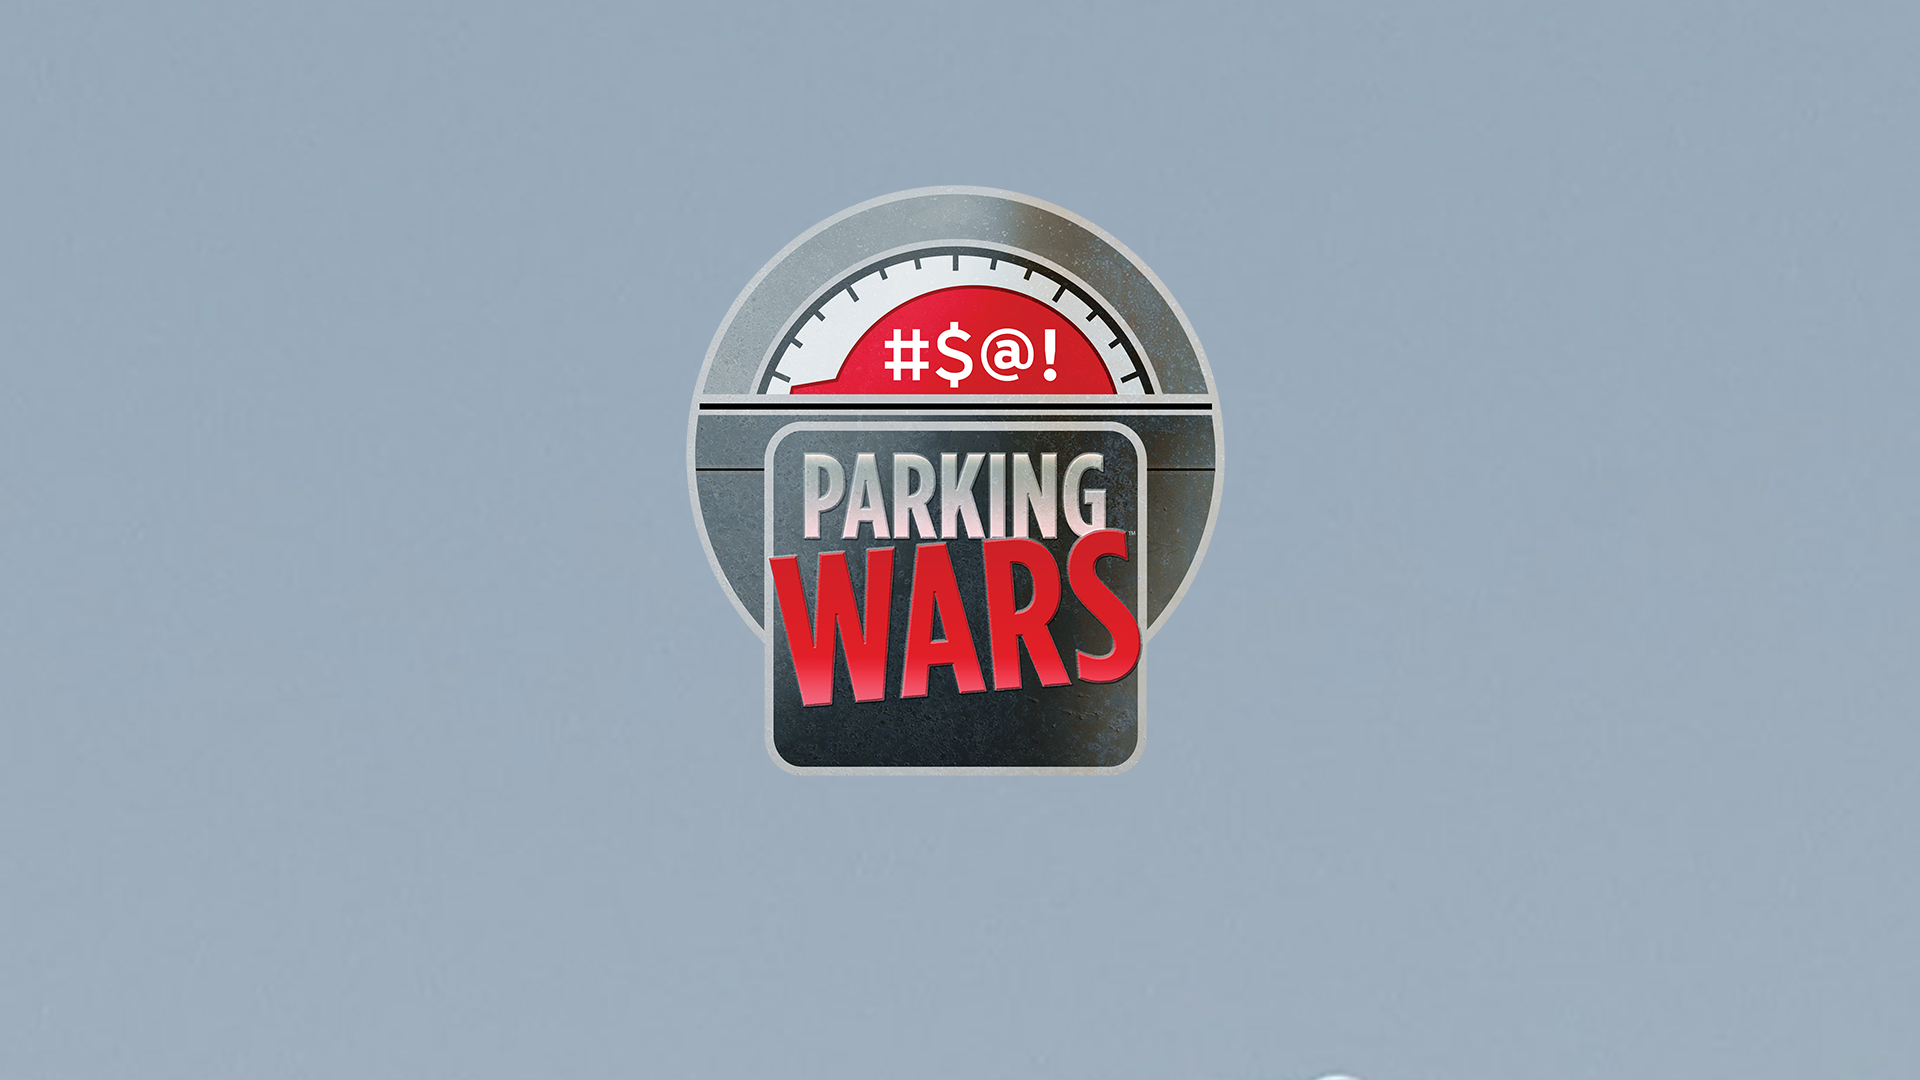 Parking Wars Full Episodes, Video & More A&E